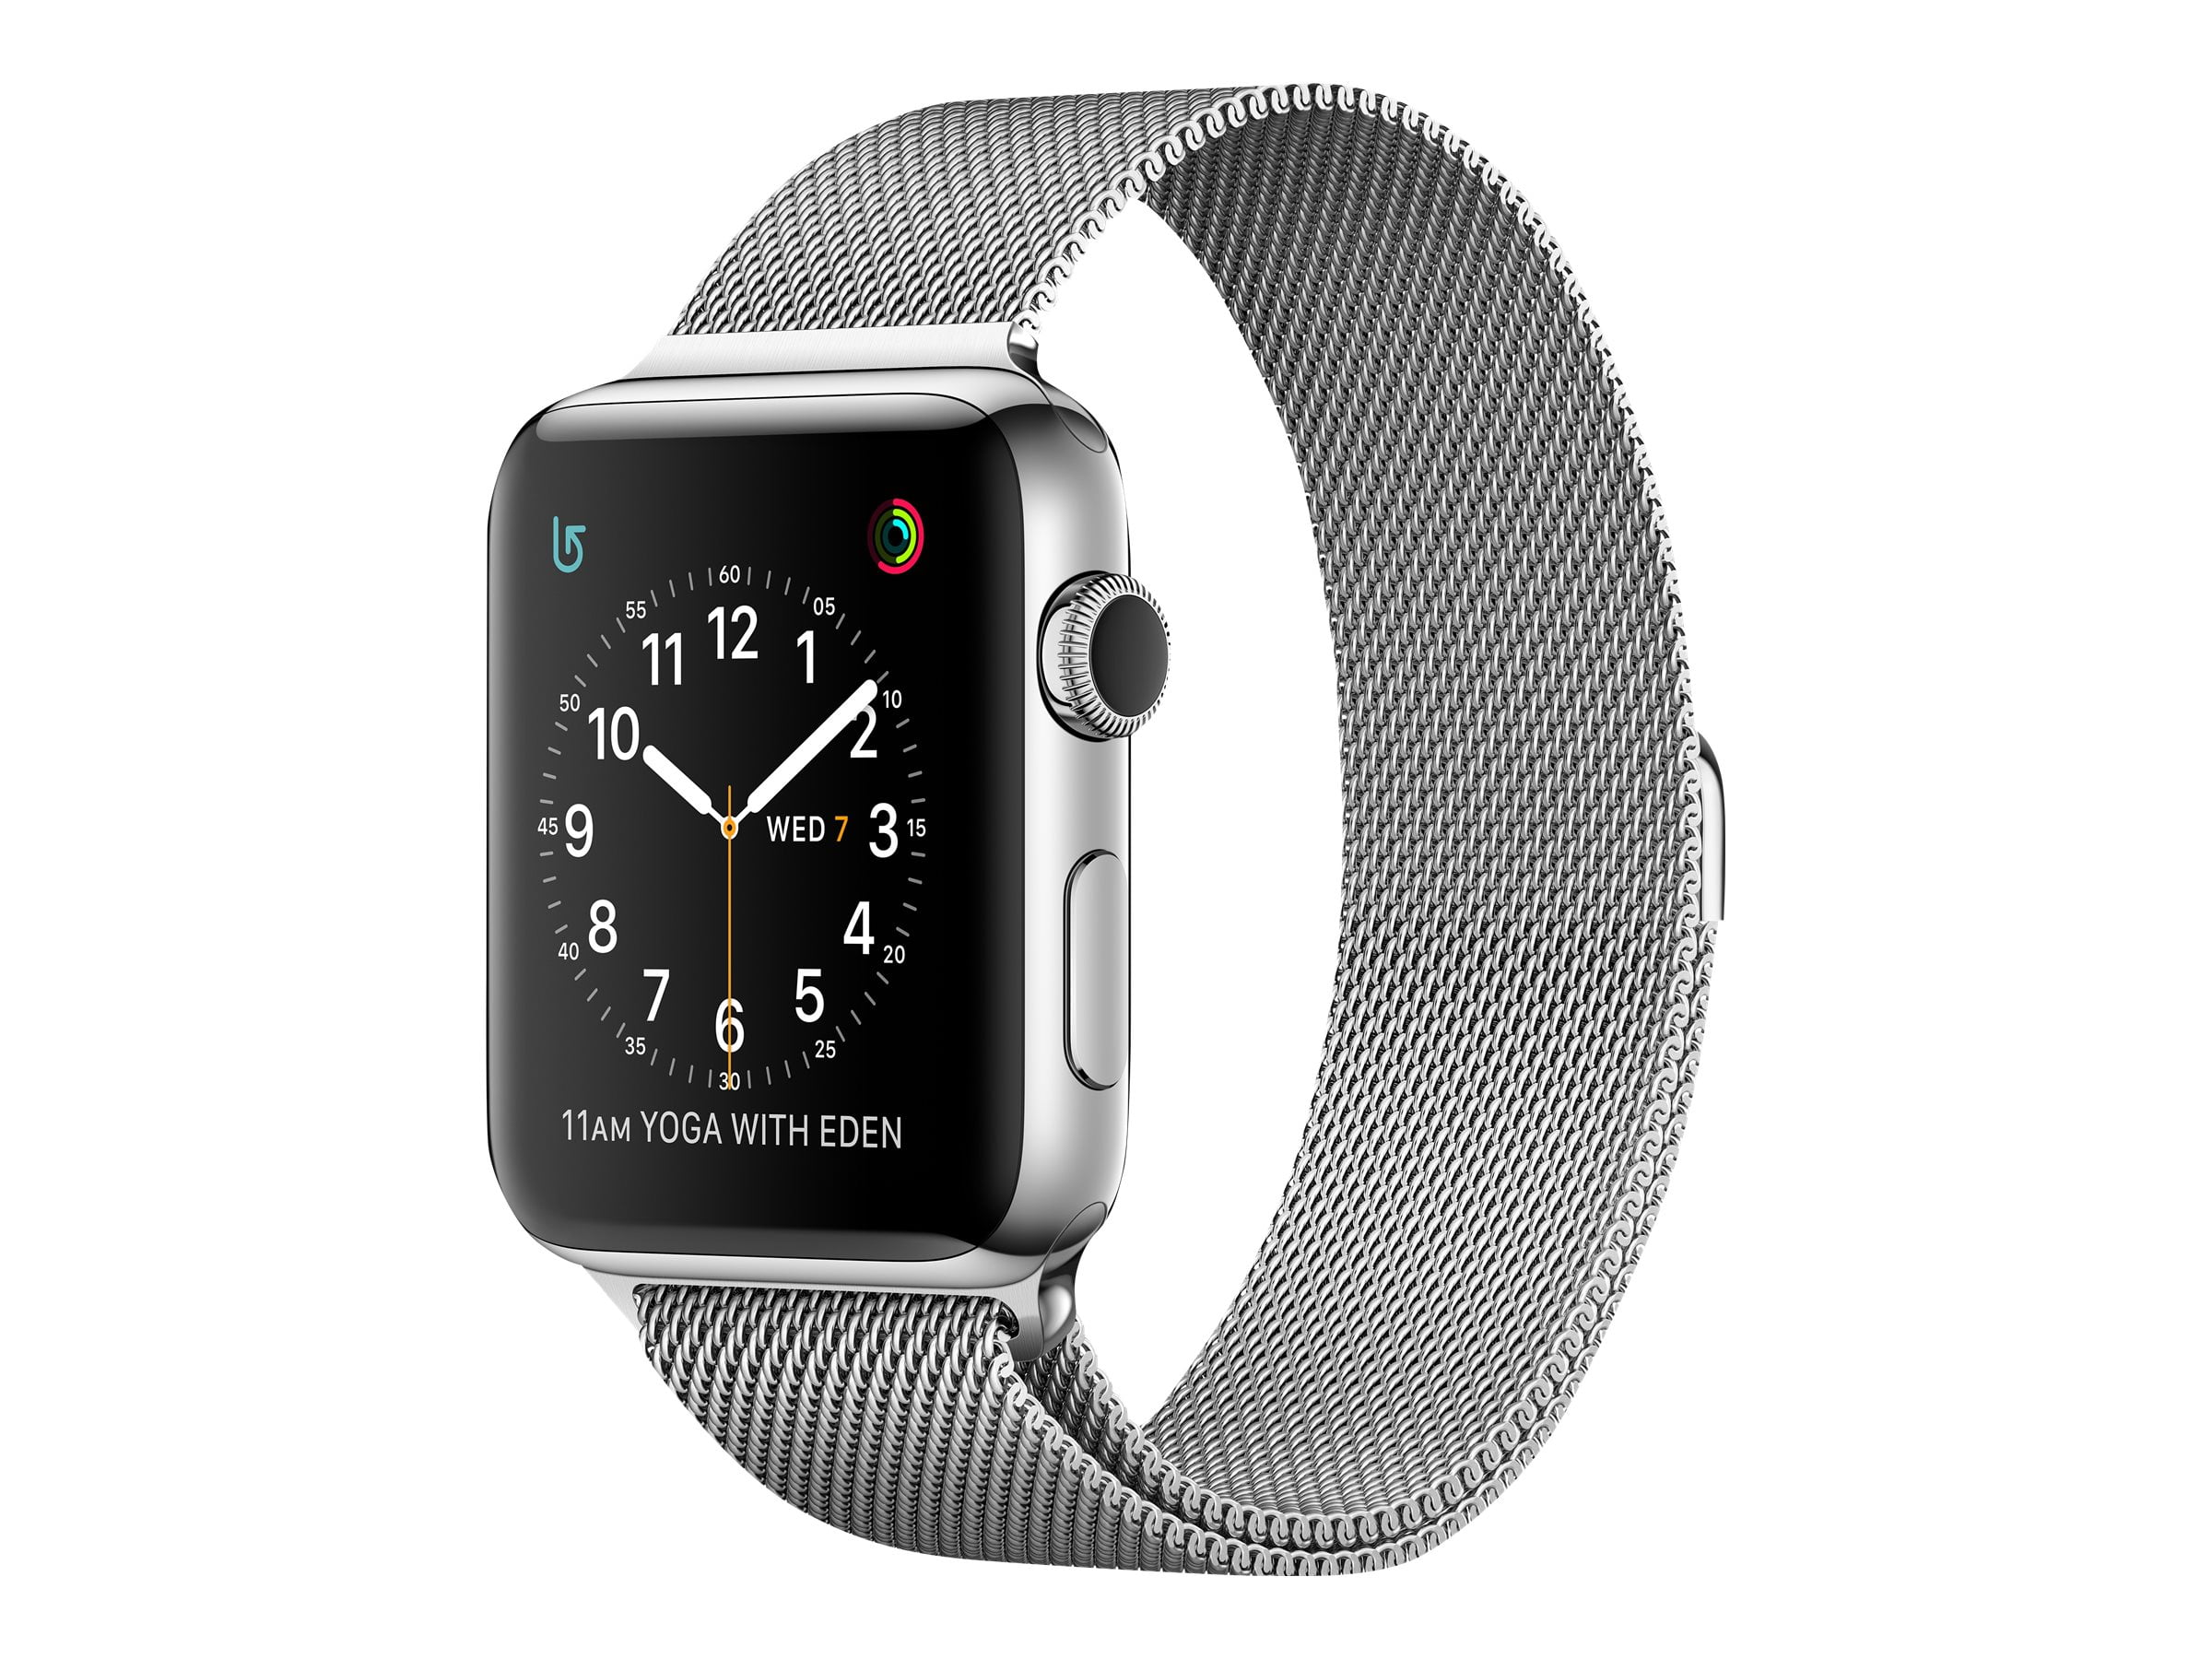 Apple Watch Series 2 - 42 mm - stainless steel - smart watch with milanese  loop - stainless steel - silver - wrist size: 5.91 in - 7.87 in - Wi-Fi, 